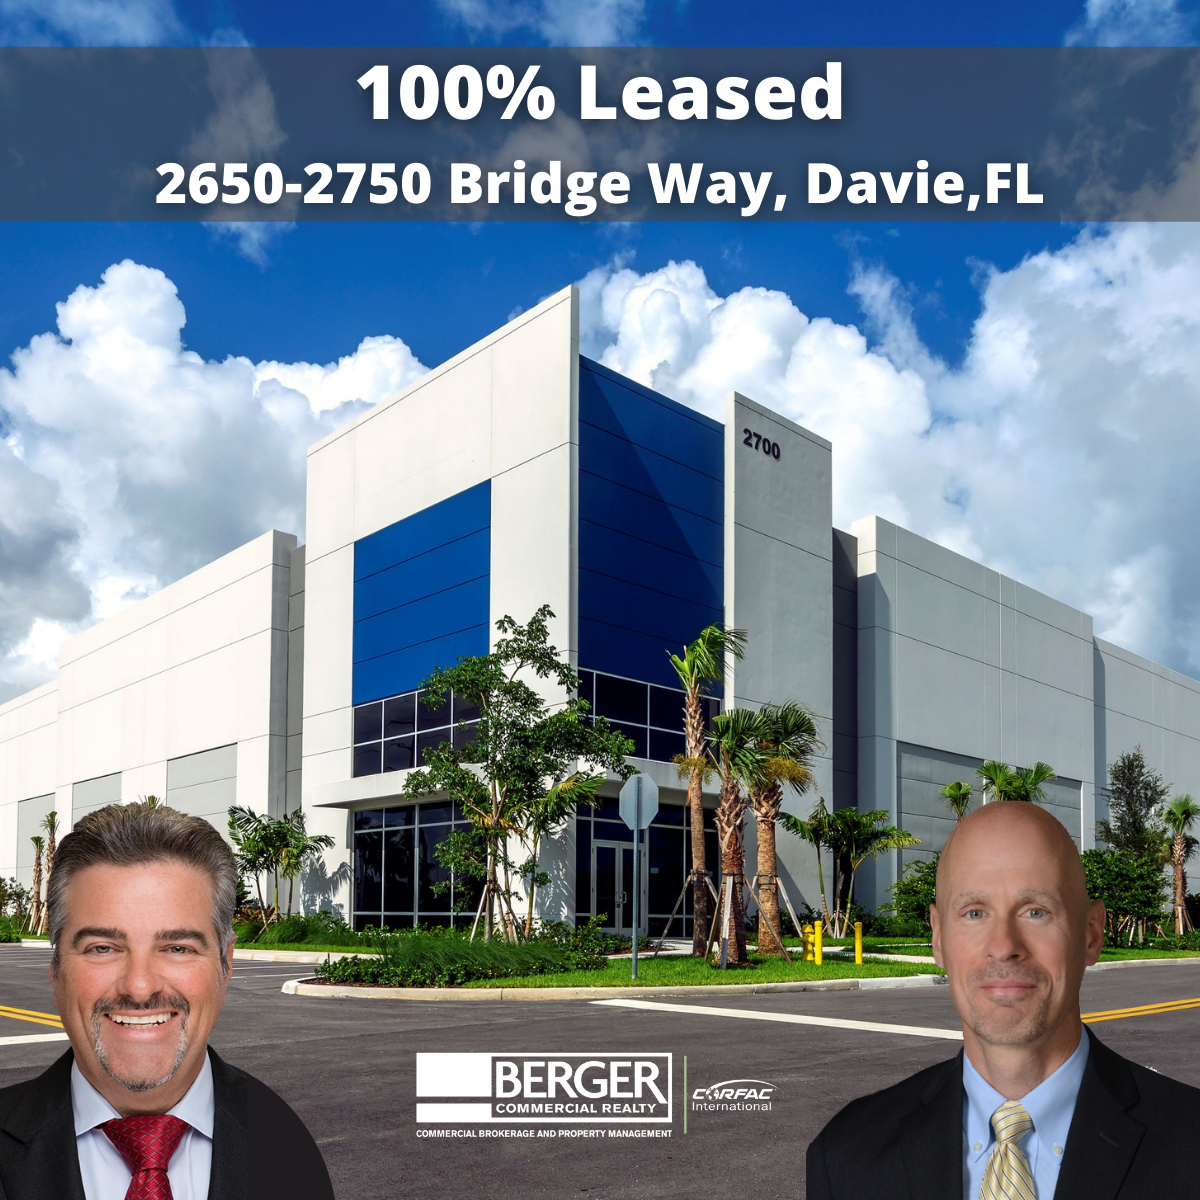 Berger Commercial Realty’s Keith Graves, CCIM, Joseph Byrnes Bring Bridge Point 595 To Full Occupancy